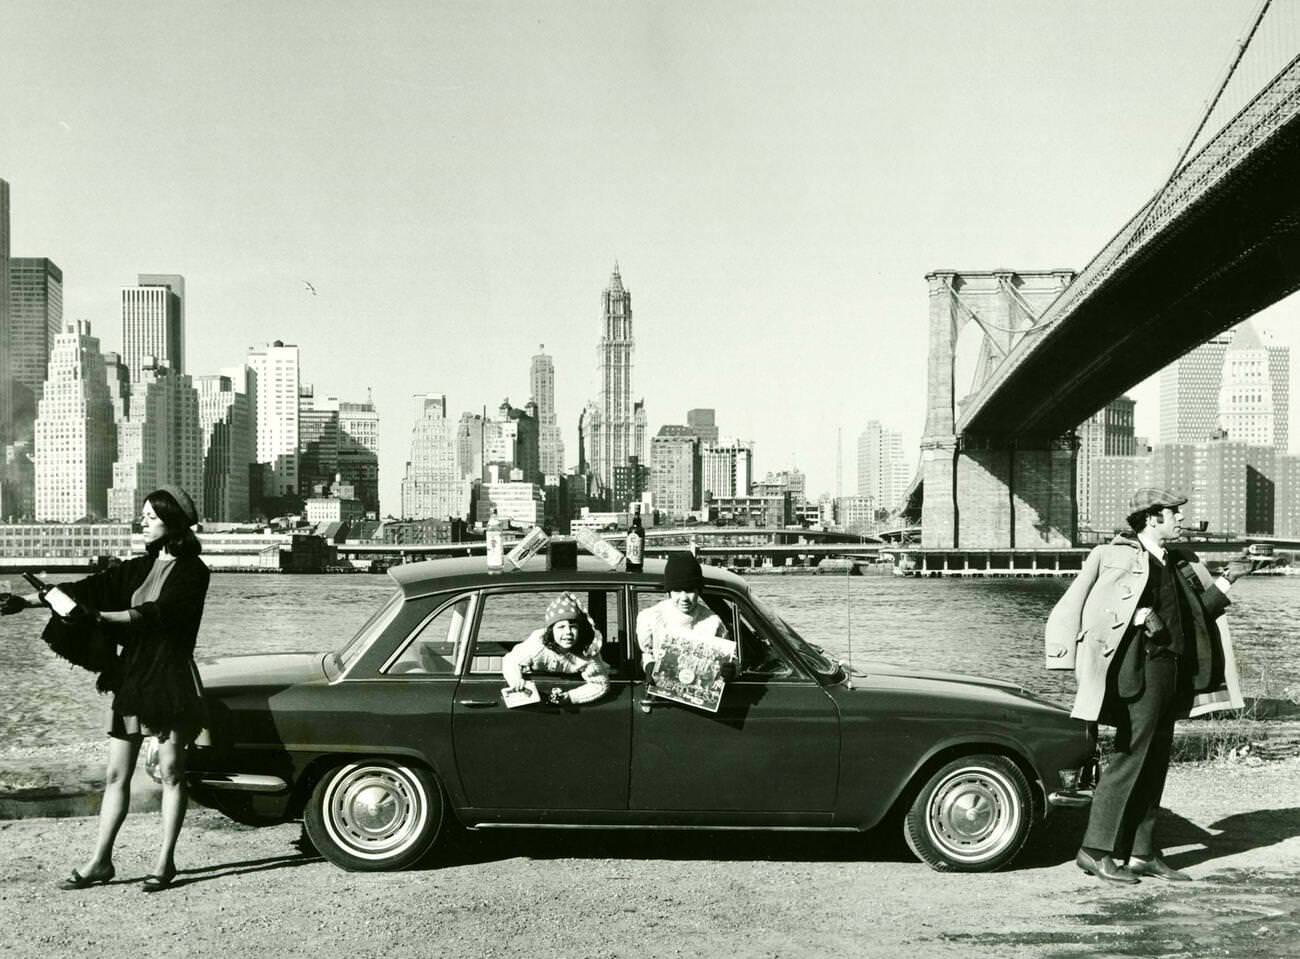 Peter Udell, His Wife Joan, And Their Children Christopher And Jennifer Against The Manhattan Skyline And Brooklyn Bridge, 1969.